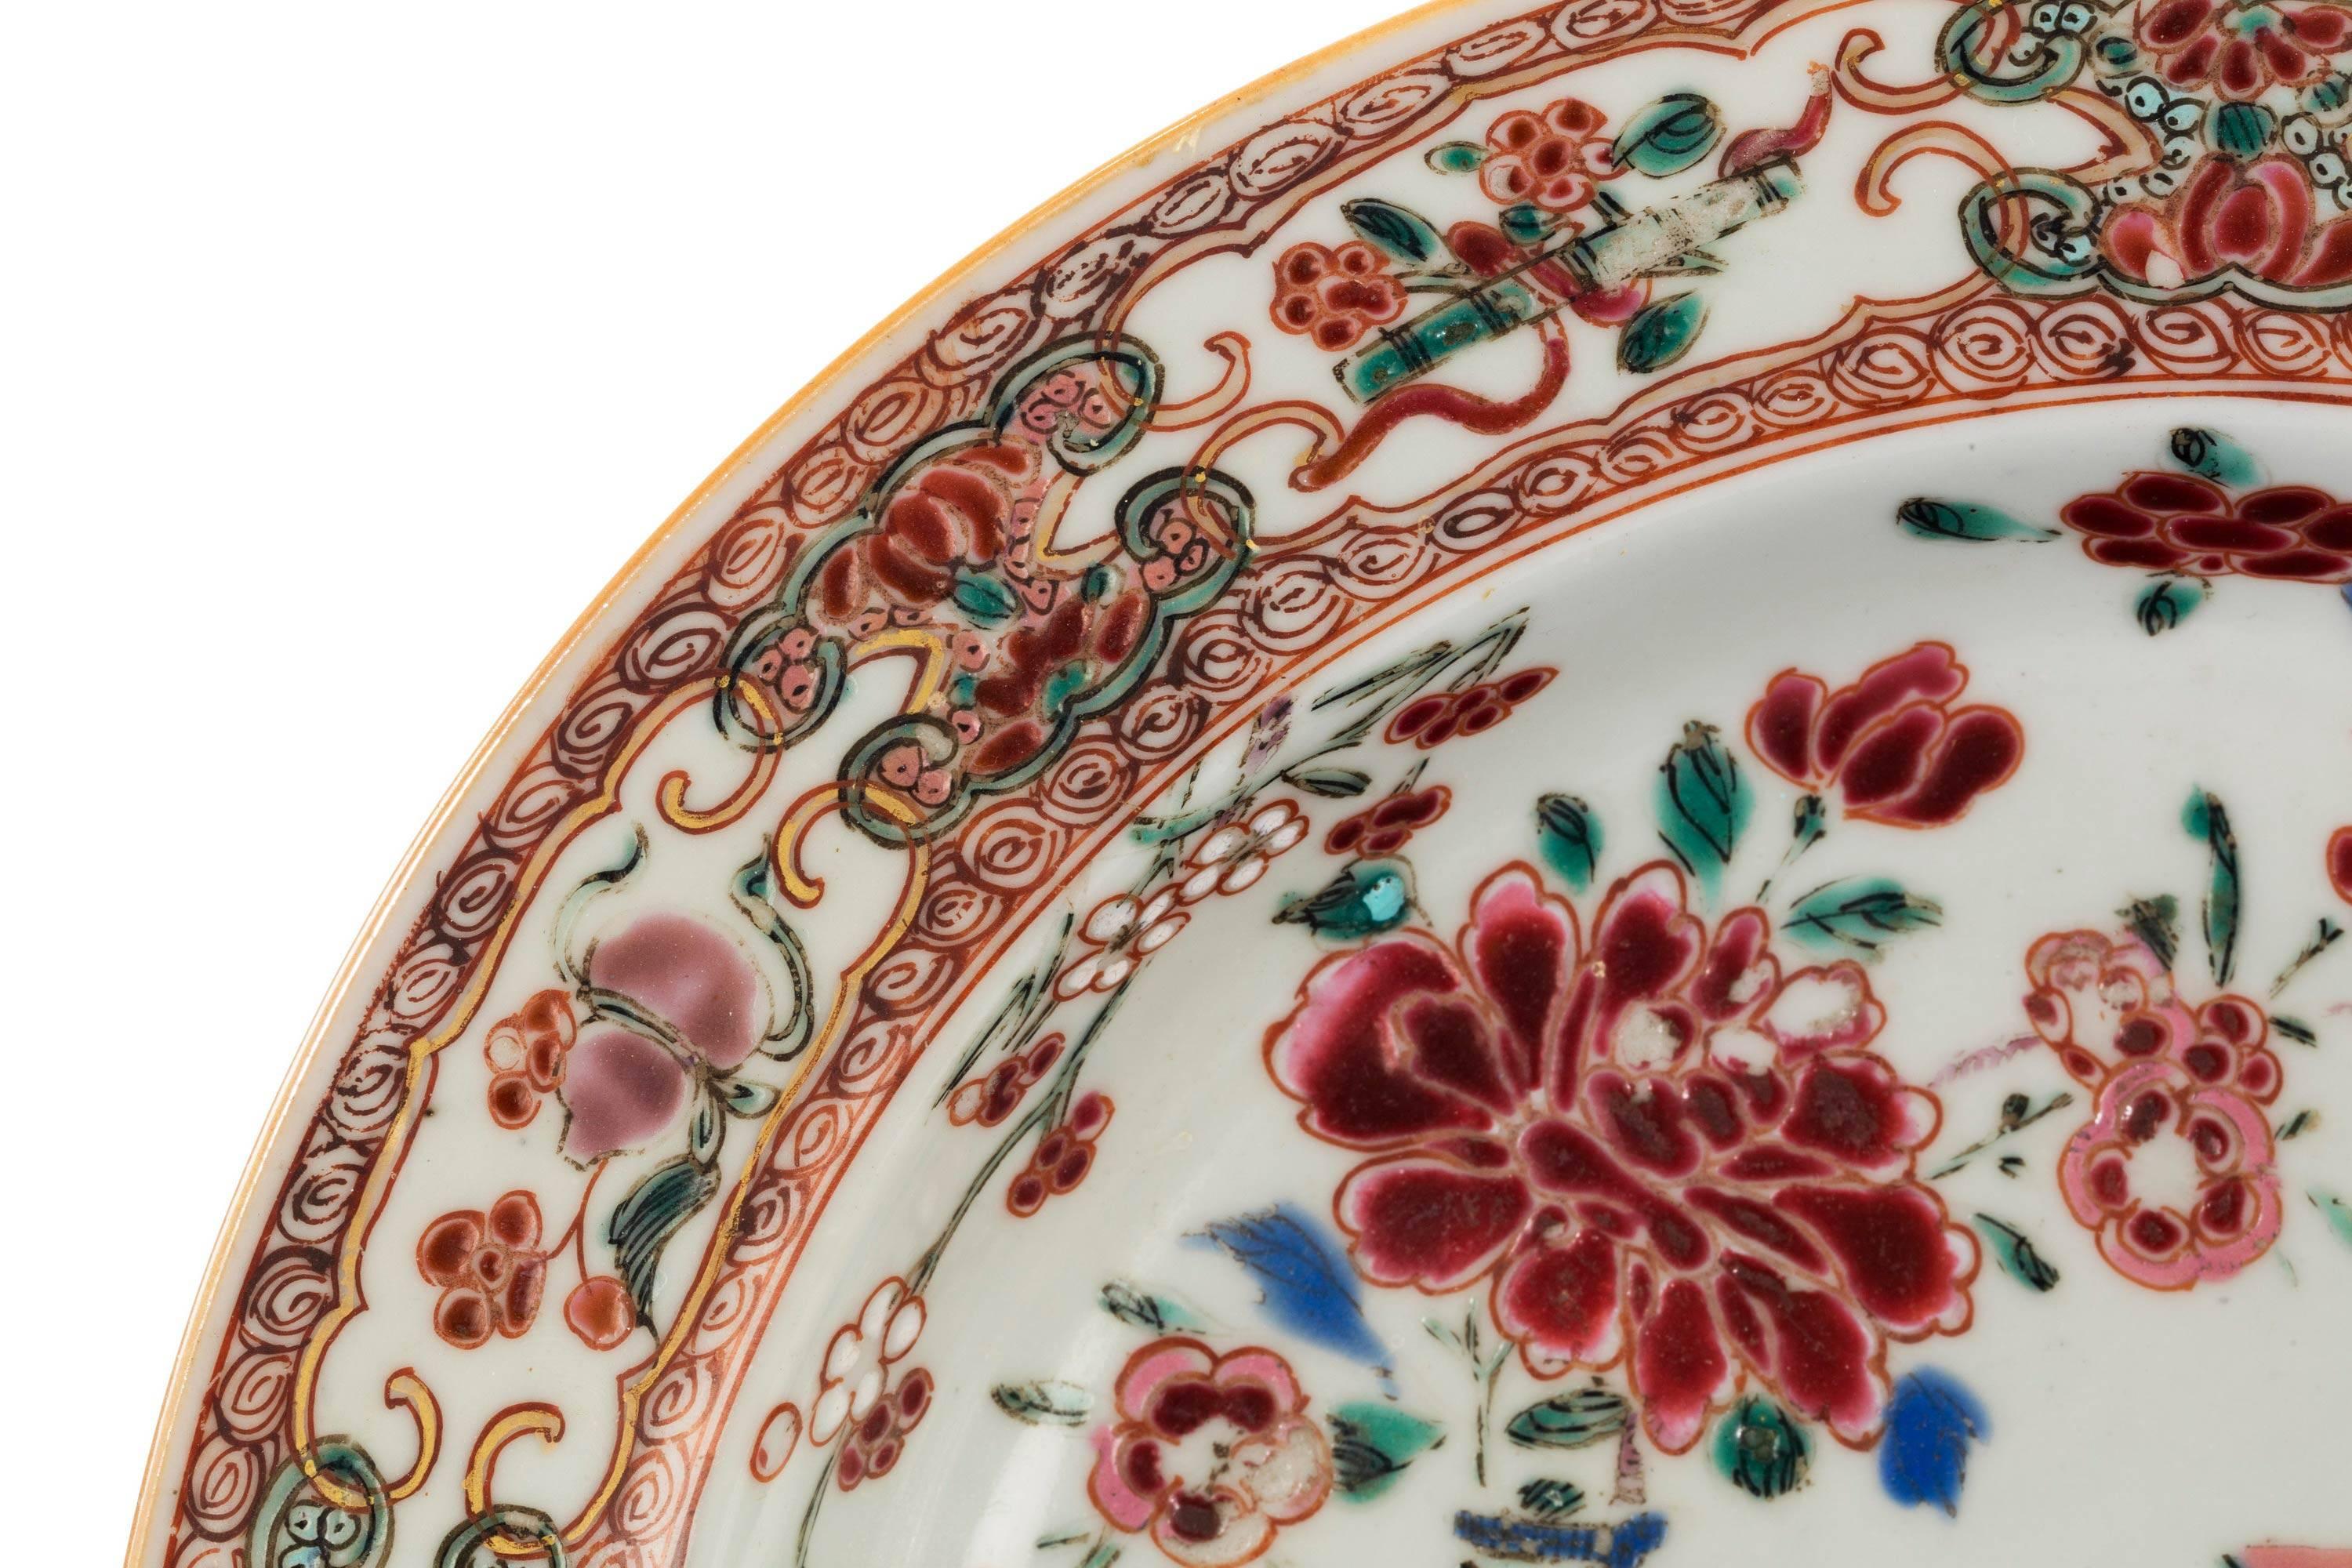 A finally painted and gilded Cantonese famille rose dish with typical border decoration. Excellent overall condition.